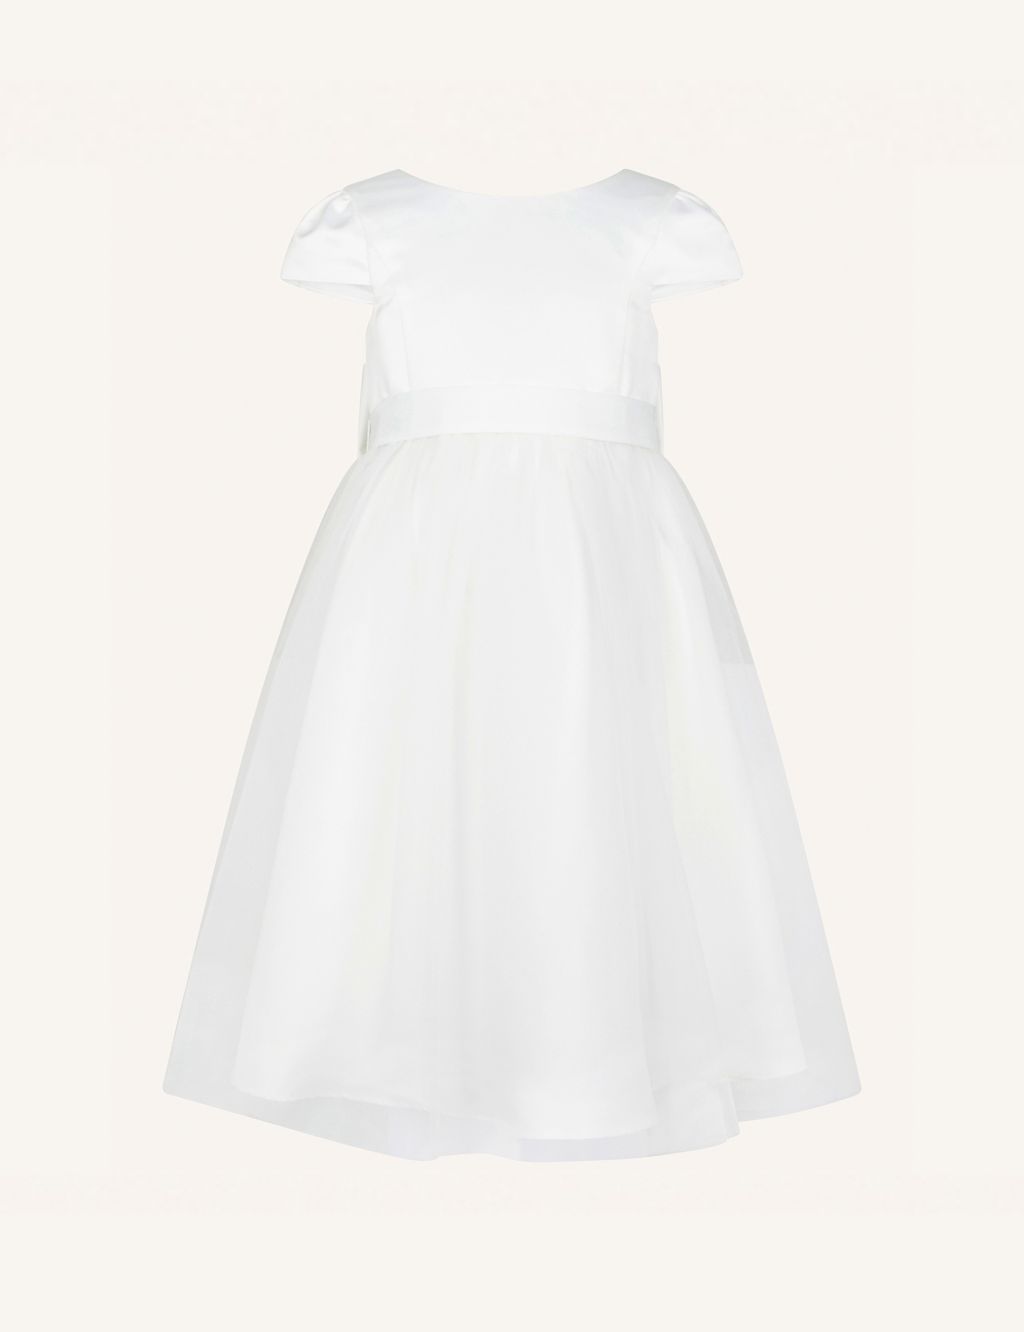 Tulle Occasion Dress (3-13 Yrs) image 1